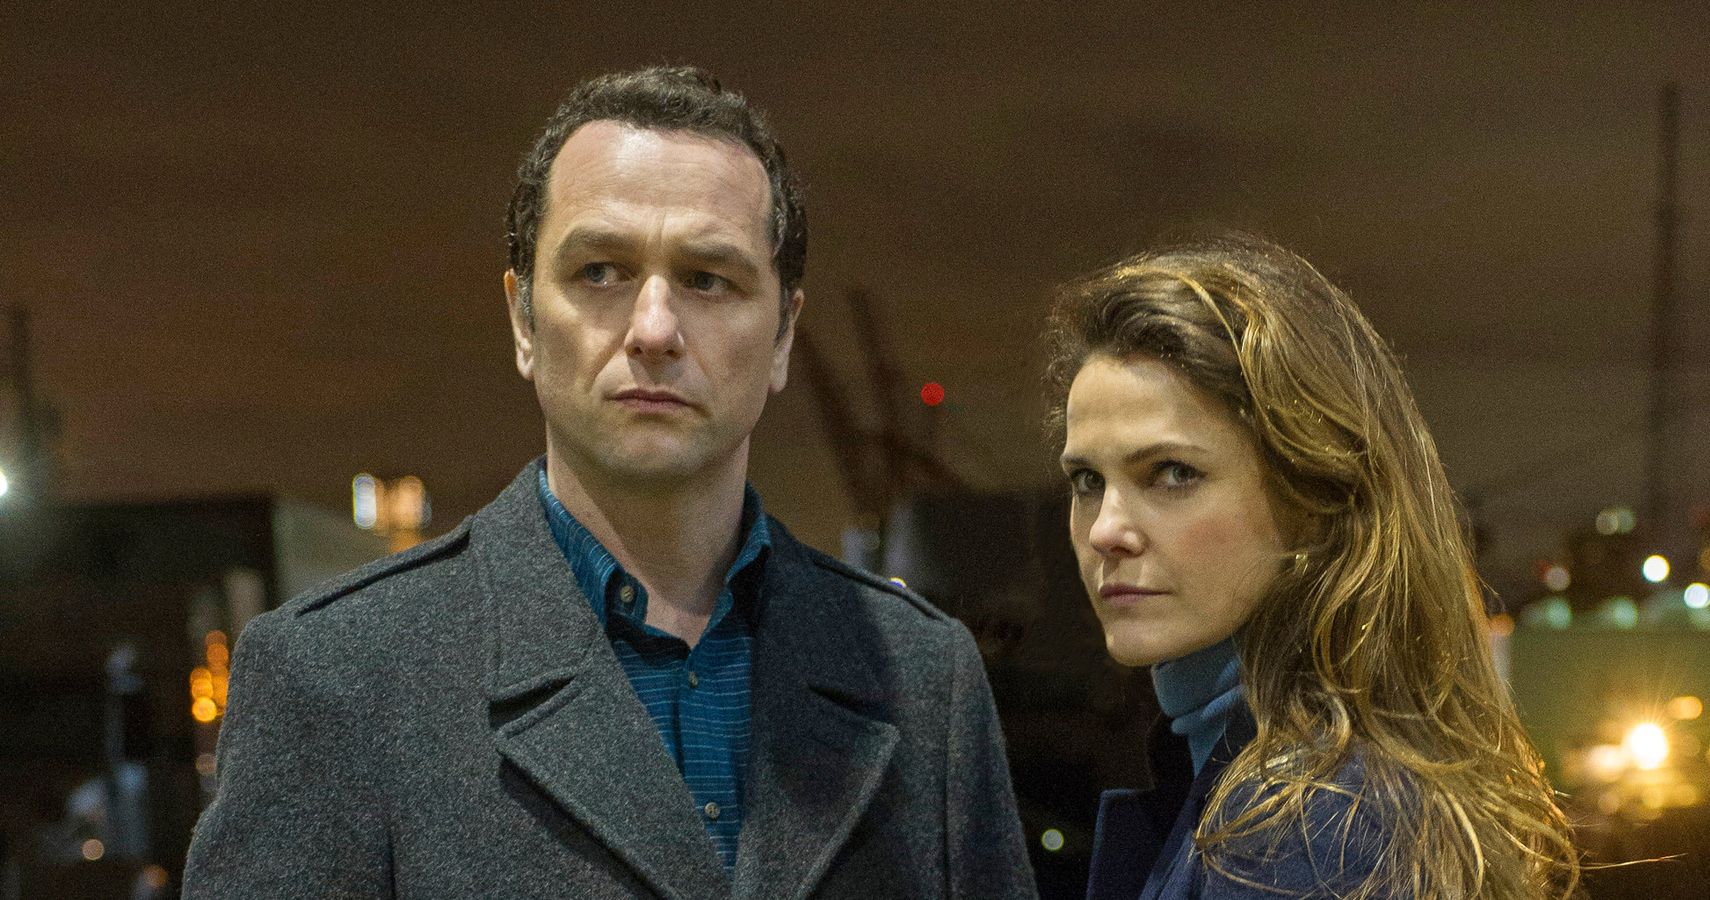 Matthew Rhys and Keri Russell starred in the FX series The Americans